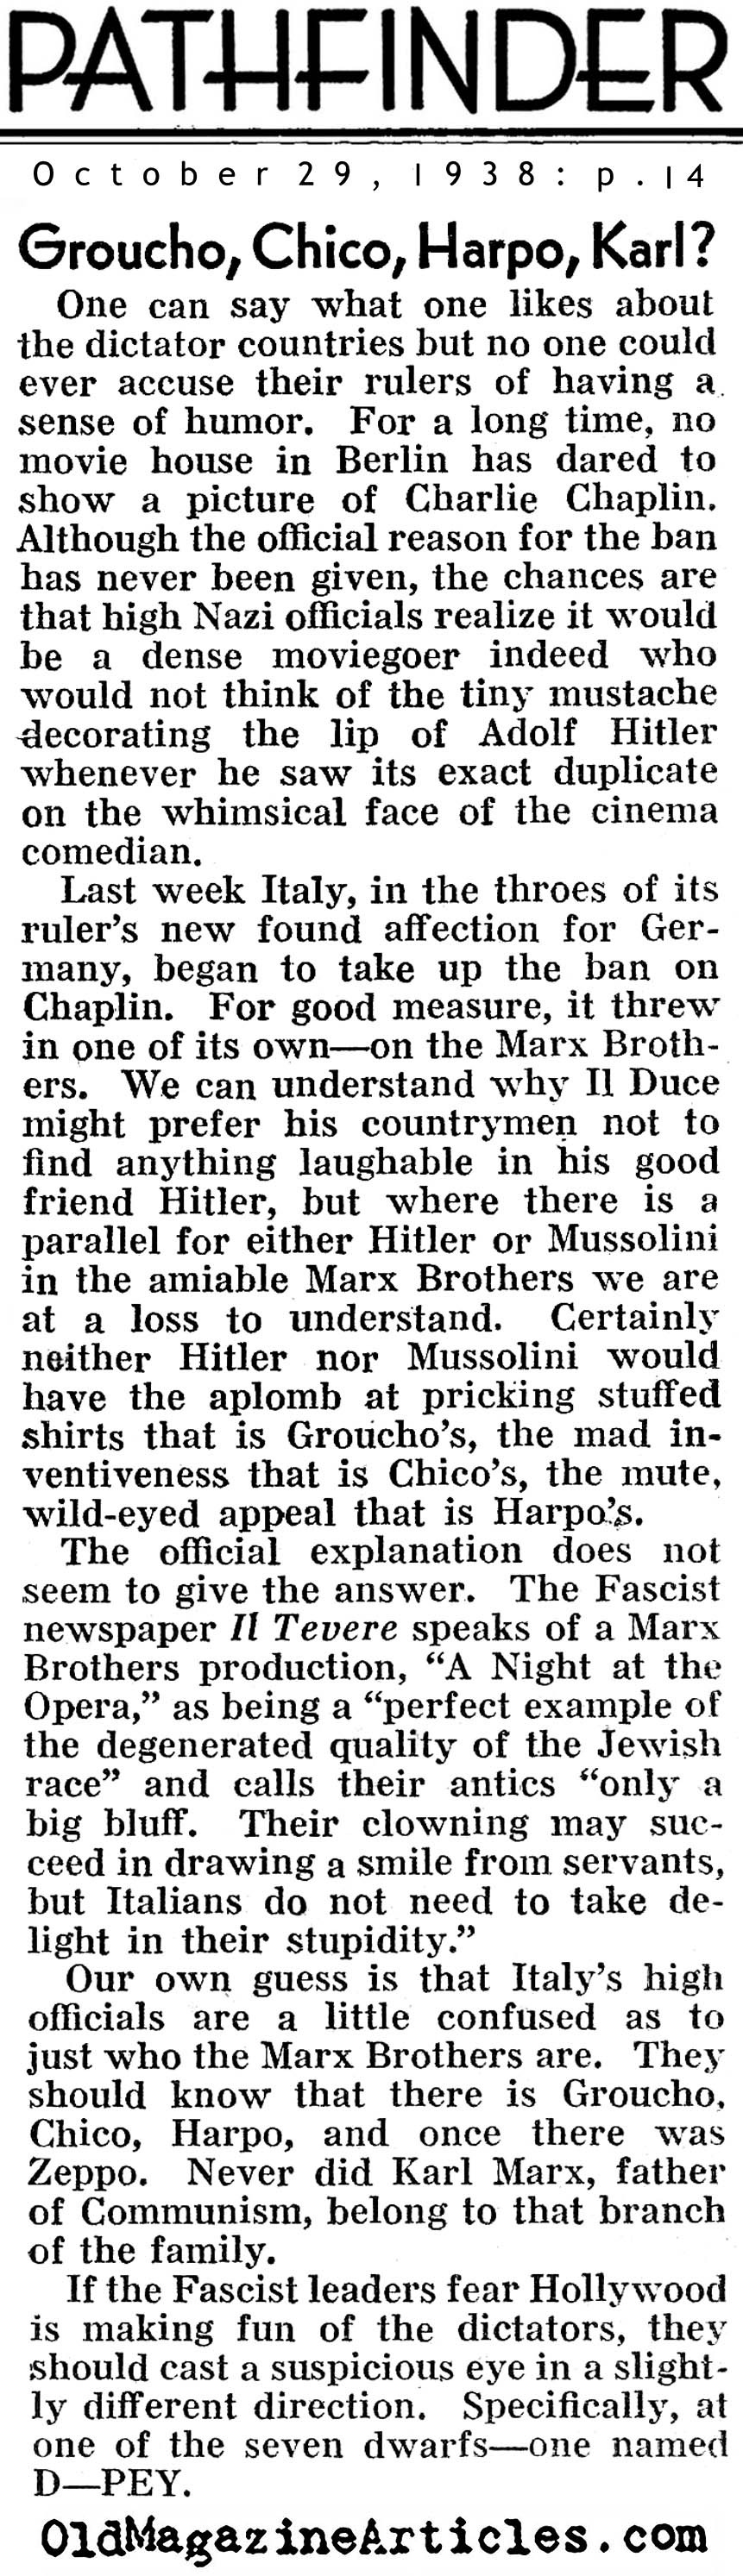 Mussolini - Irked By The Marx Brothers (Pathfinder Magazine, 1938)